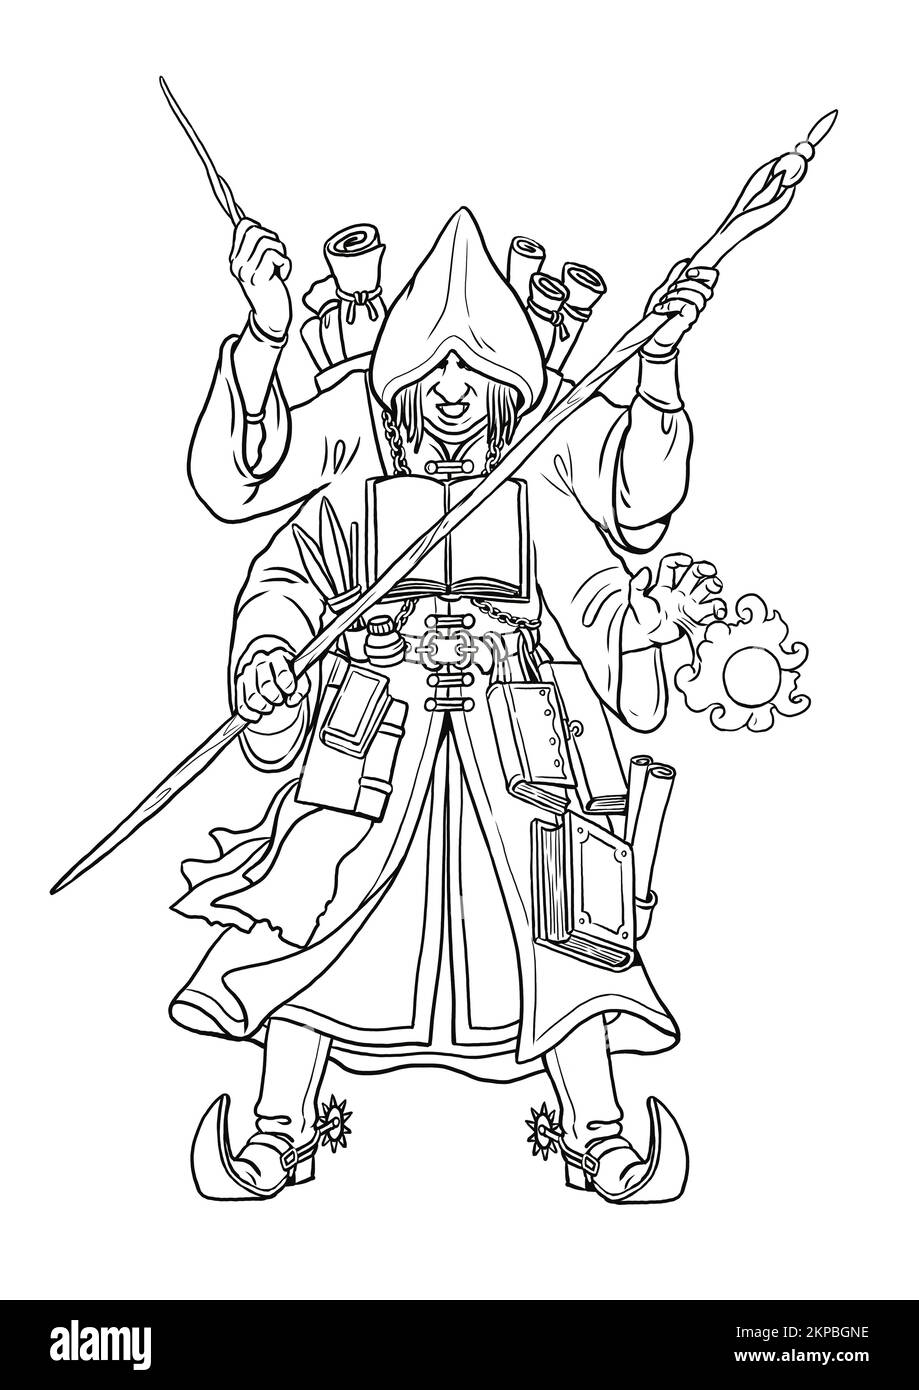 Wizard with four arms. Coloring page with the magician. Coloring template with wizard. Stock Photo